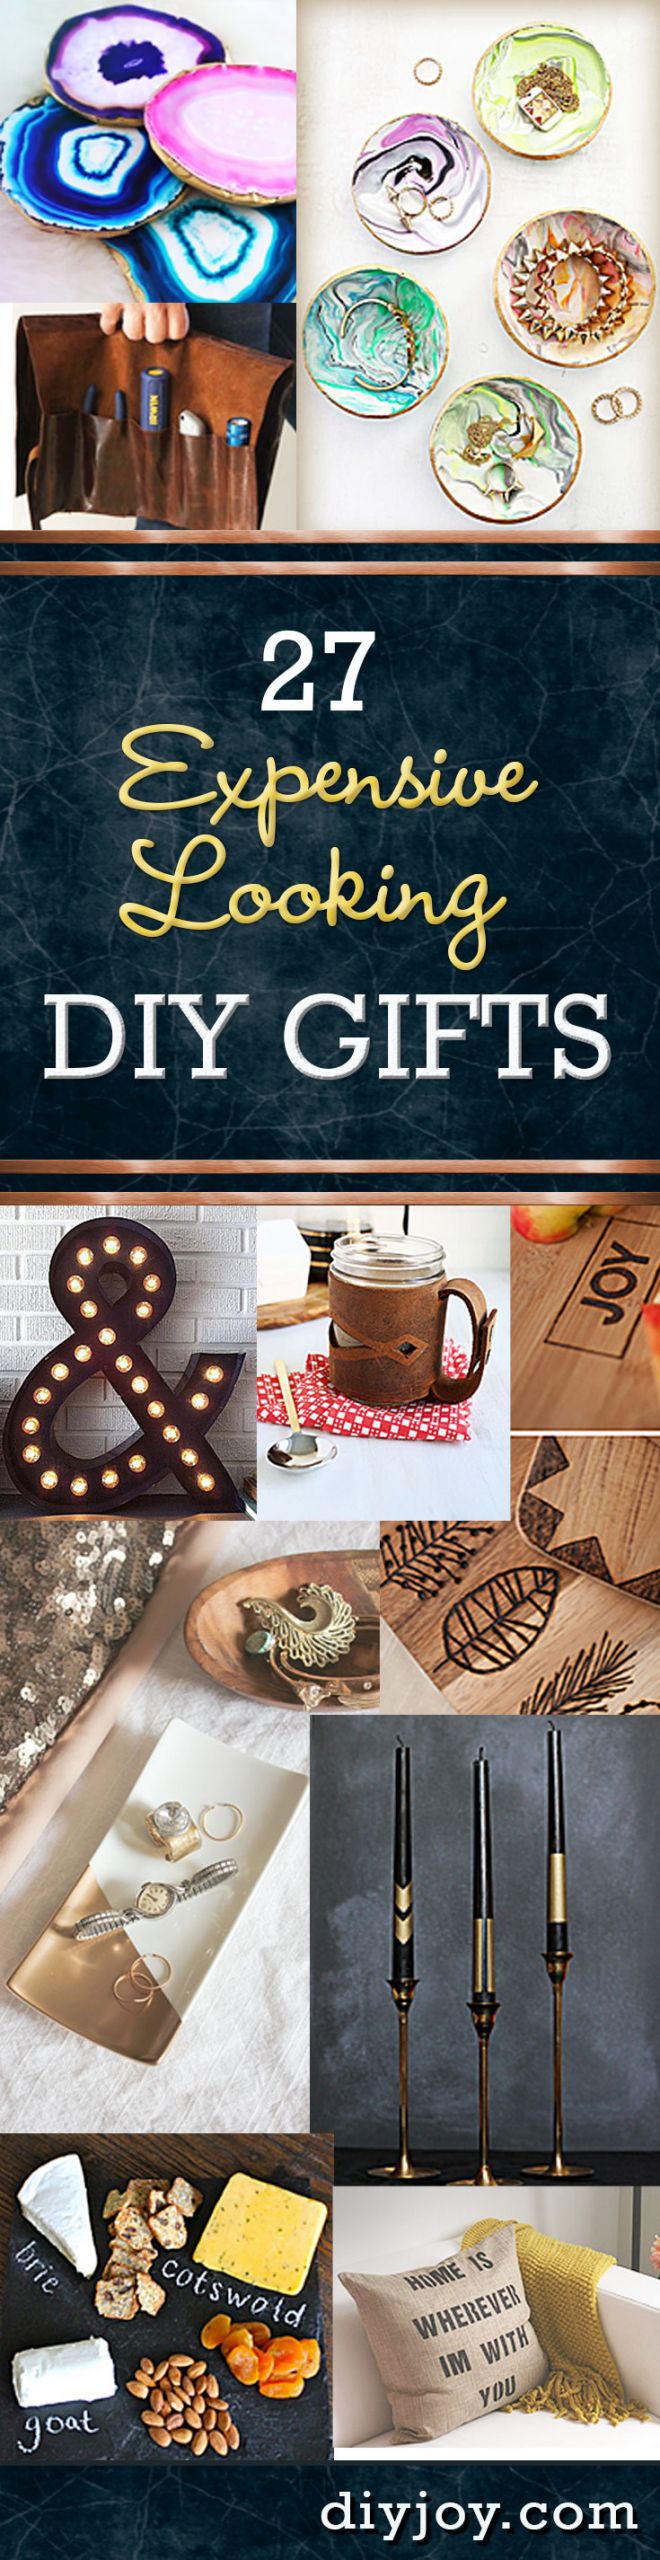 Cool DIY Christmas Gifts
 27 Expensive Looking Inexpensive DIY Gifts